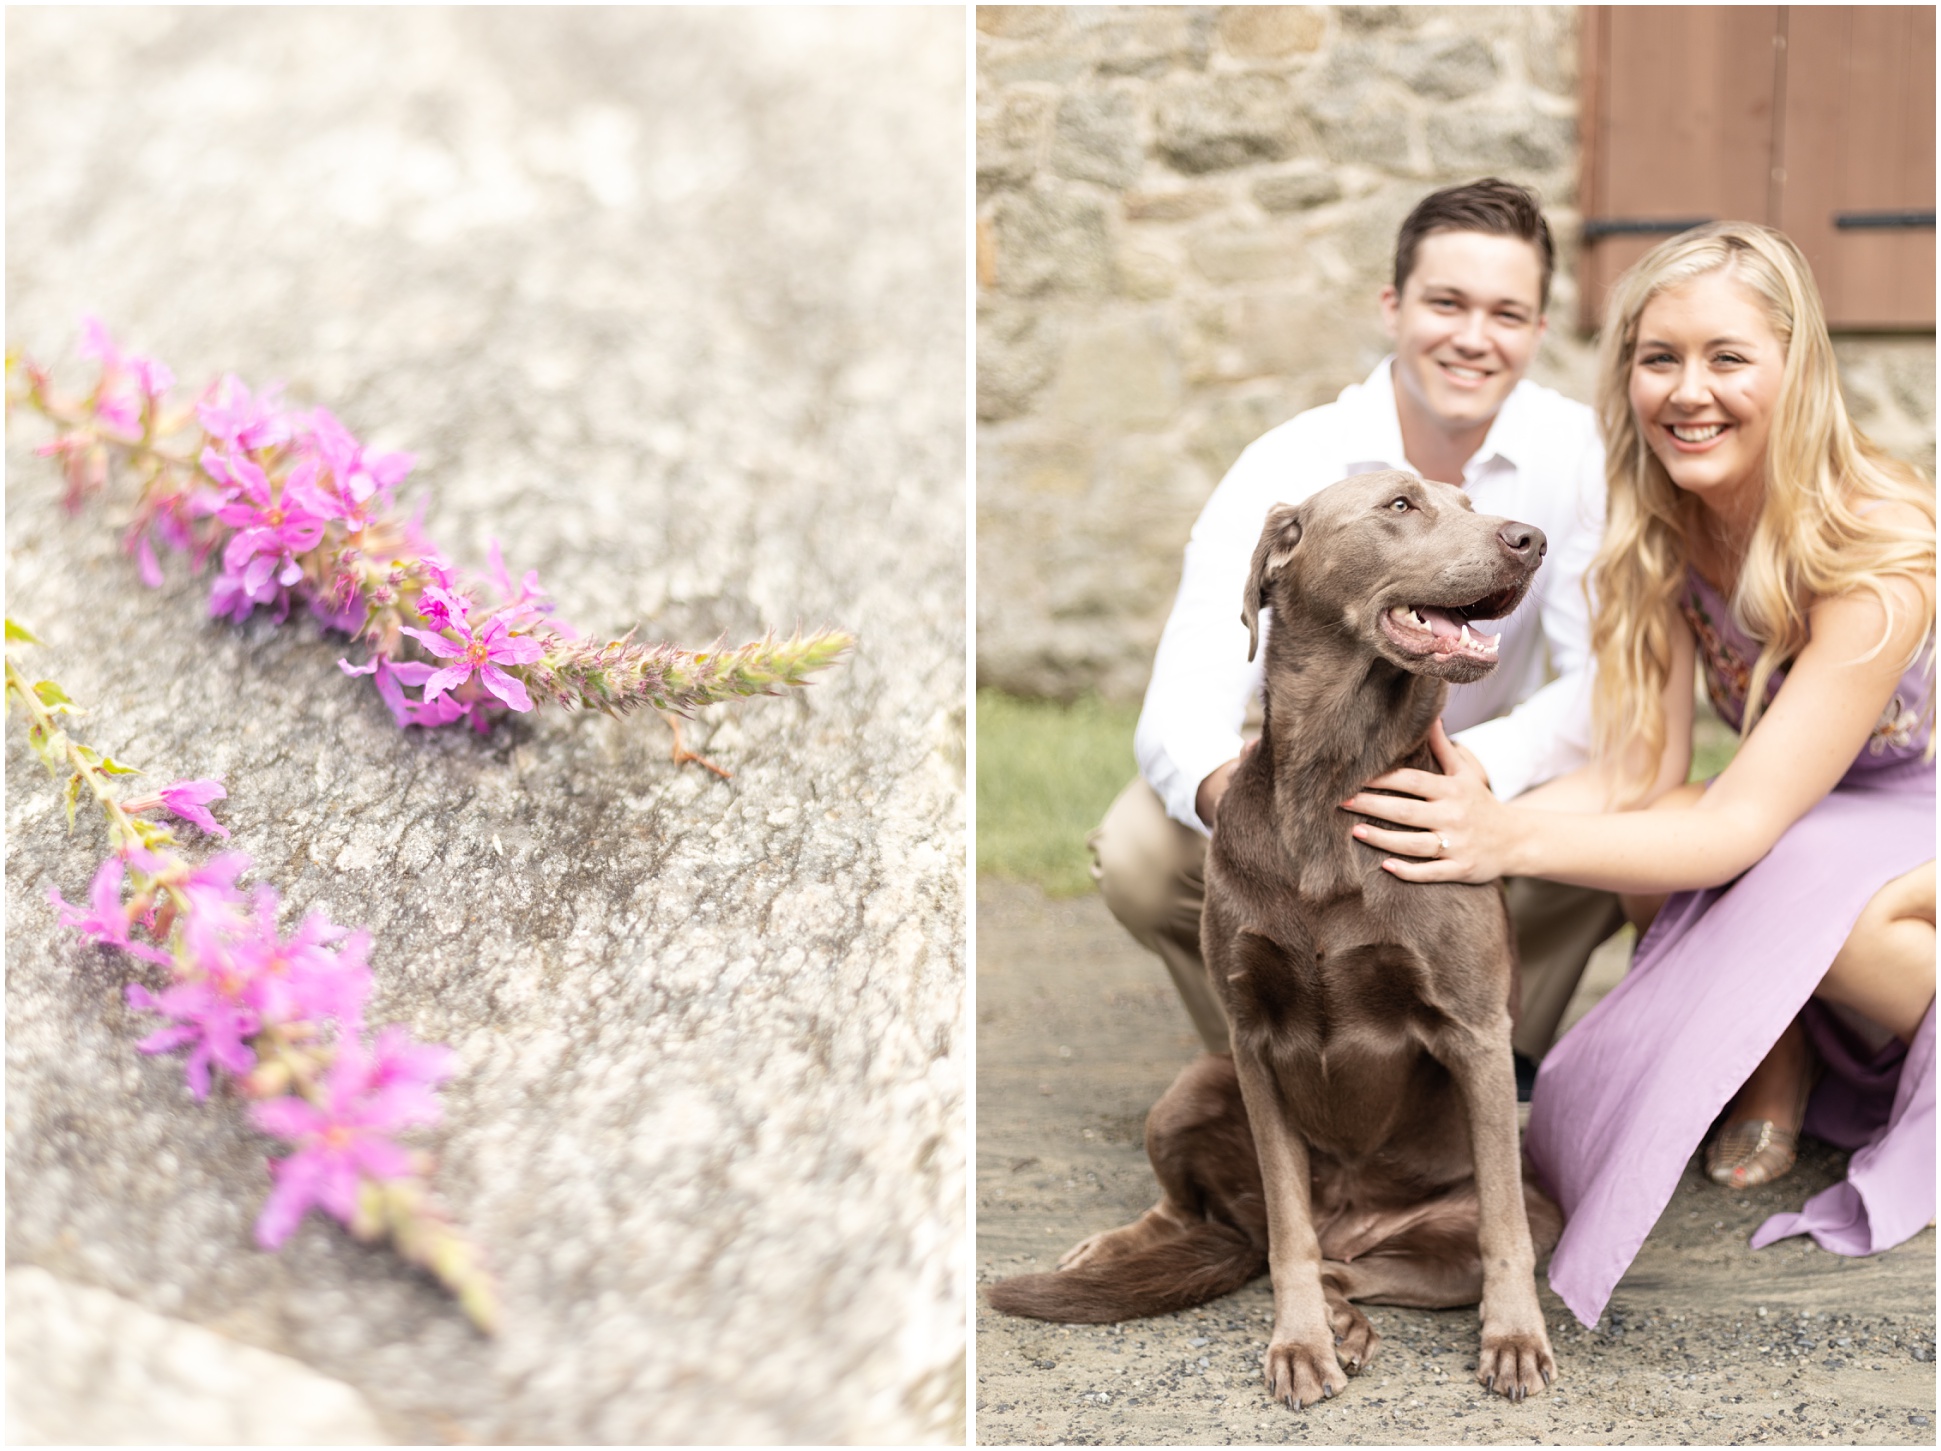 The left image is of the flowers from the field near by, the right image is of the katie, rob, and their dog, kona